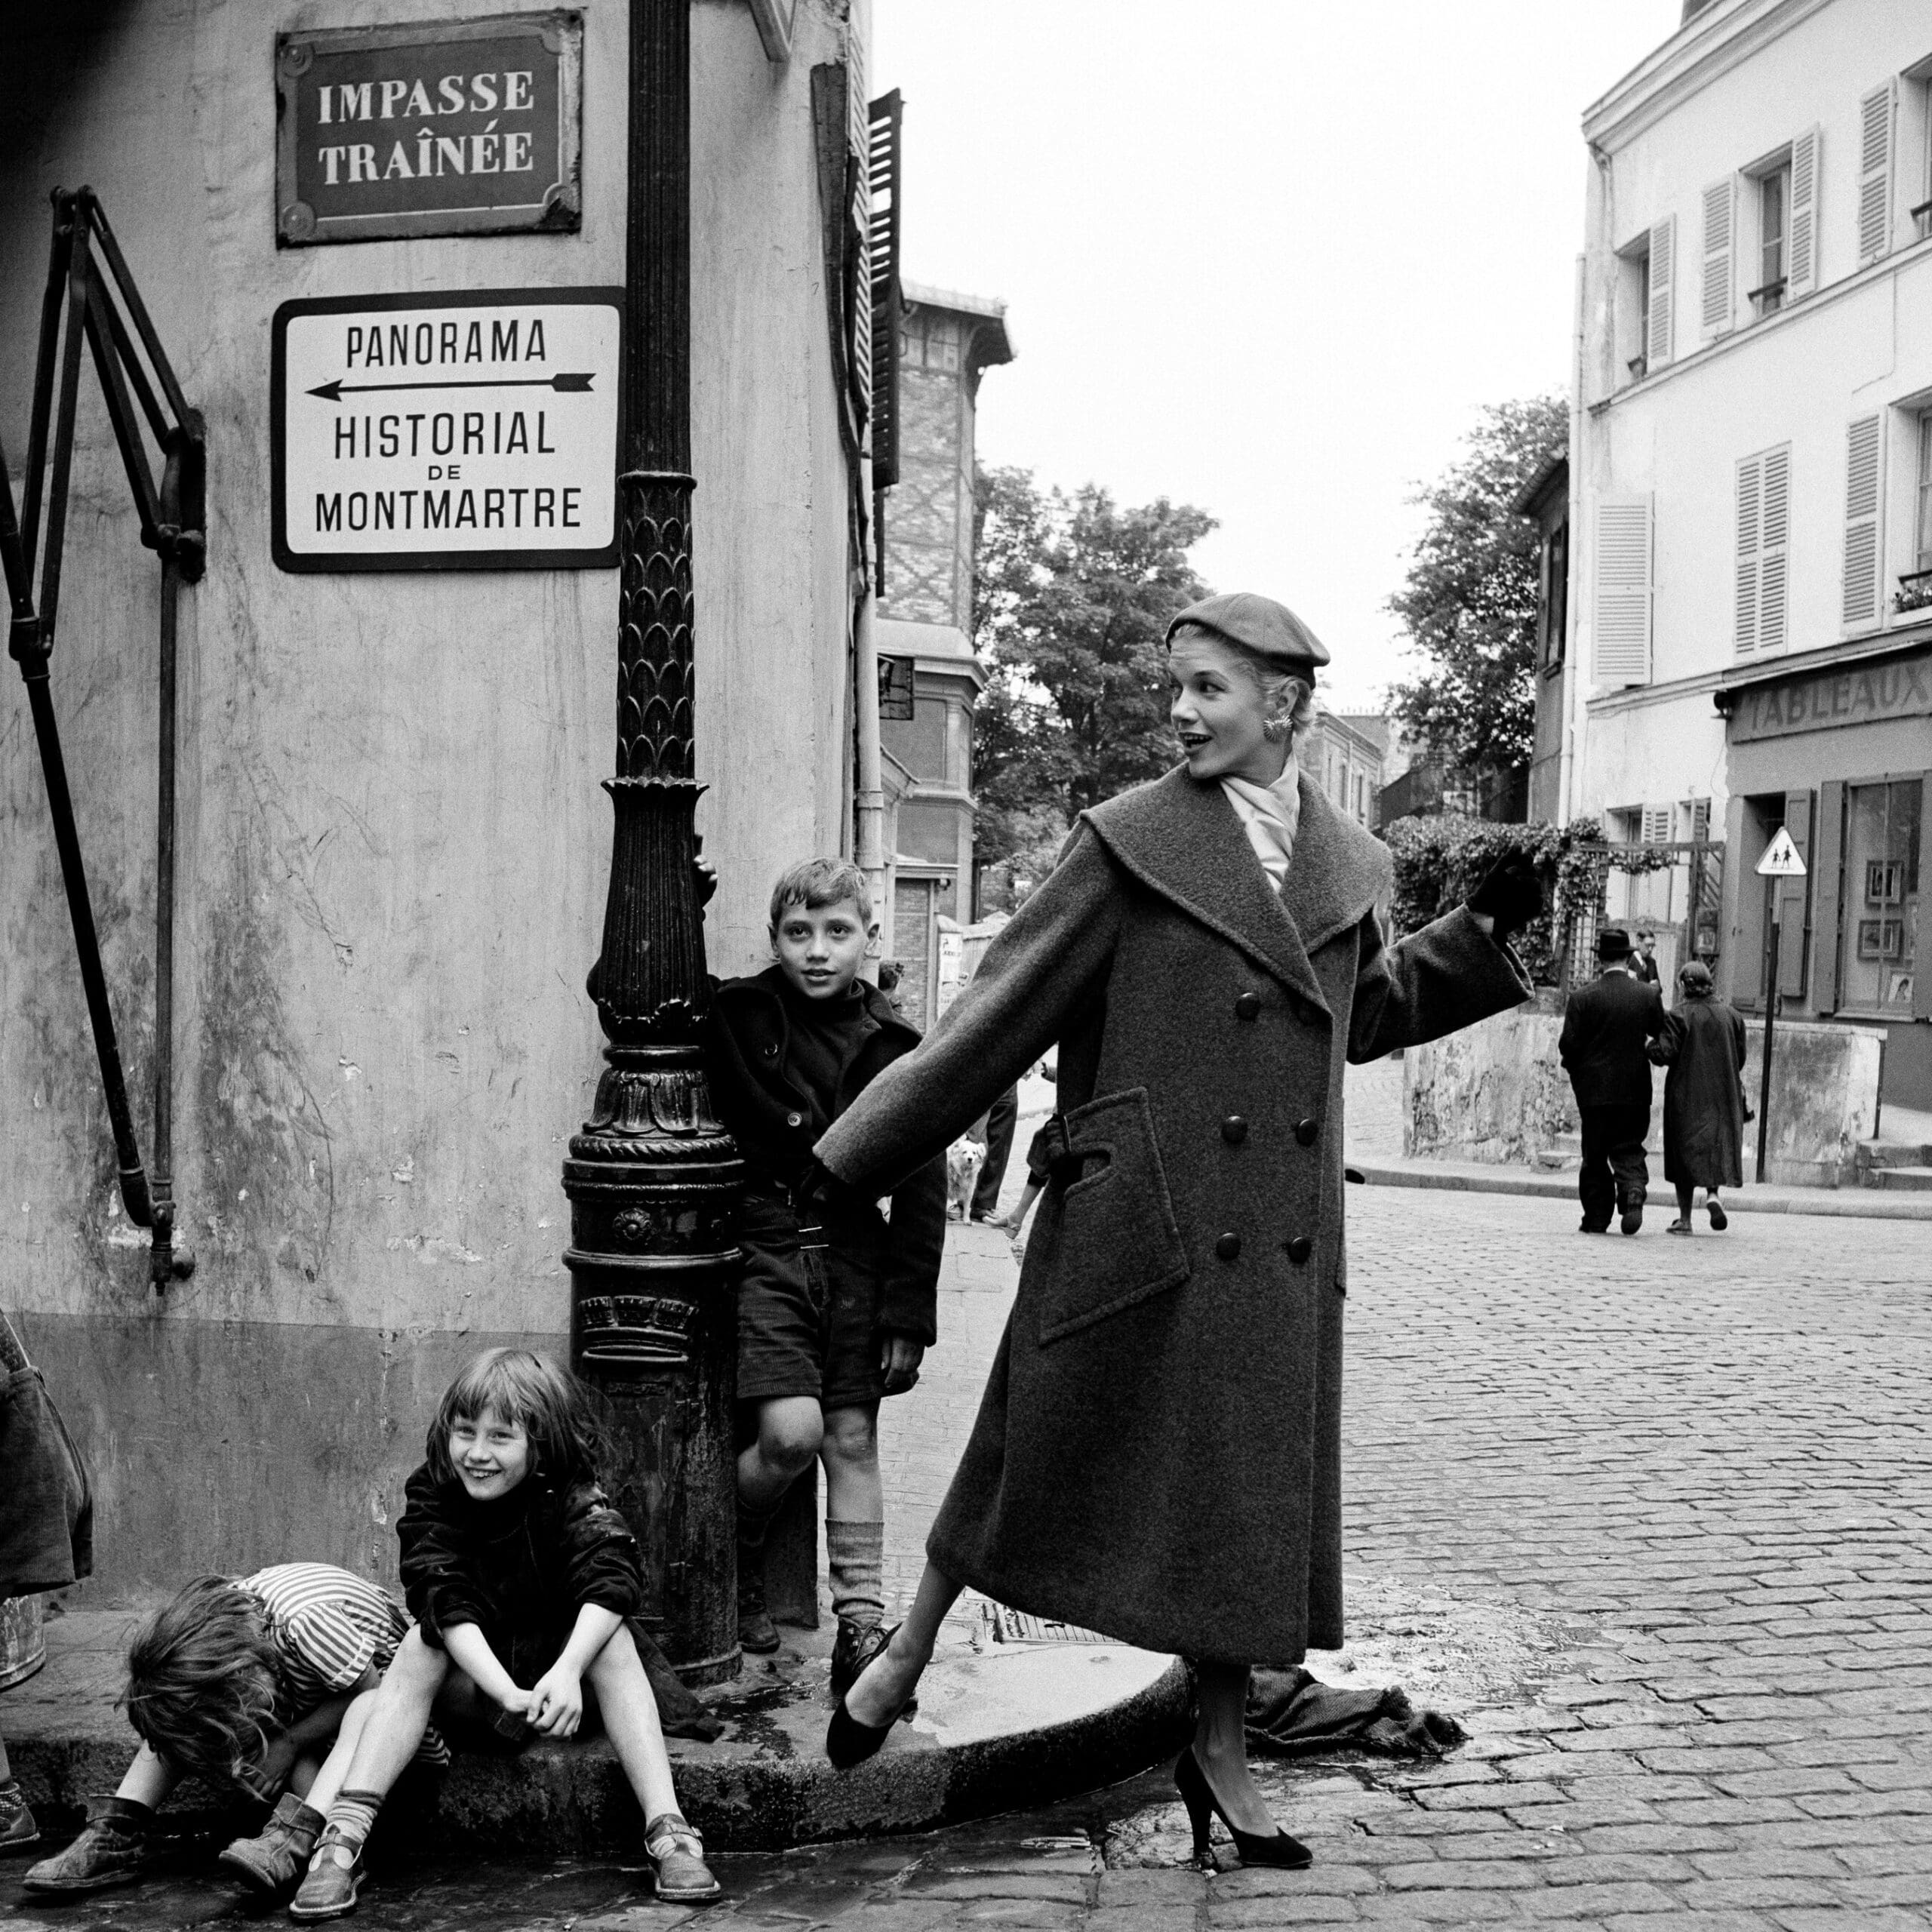 Marilyn Stafford. Model in ready-to-wear with children, Montmartre, Paris, c1955. Silver gelatin print. Courtesy of the Marilyn Stafford Collective